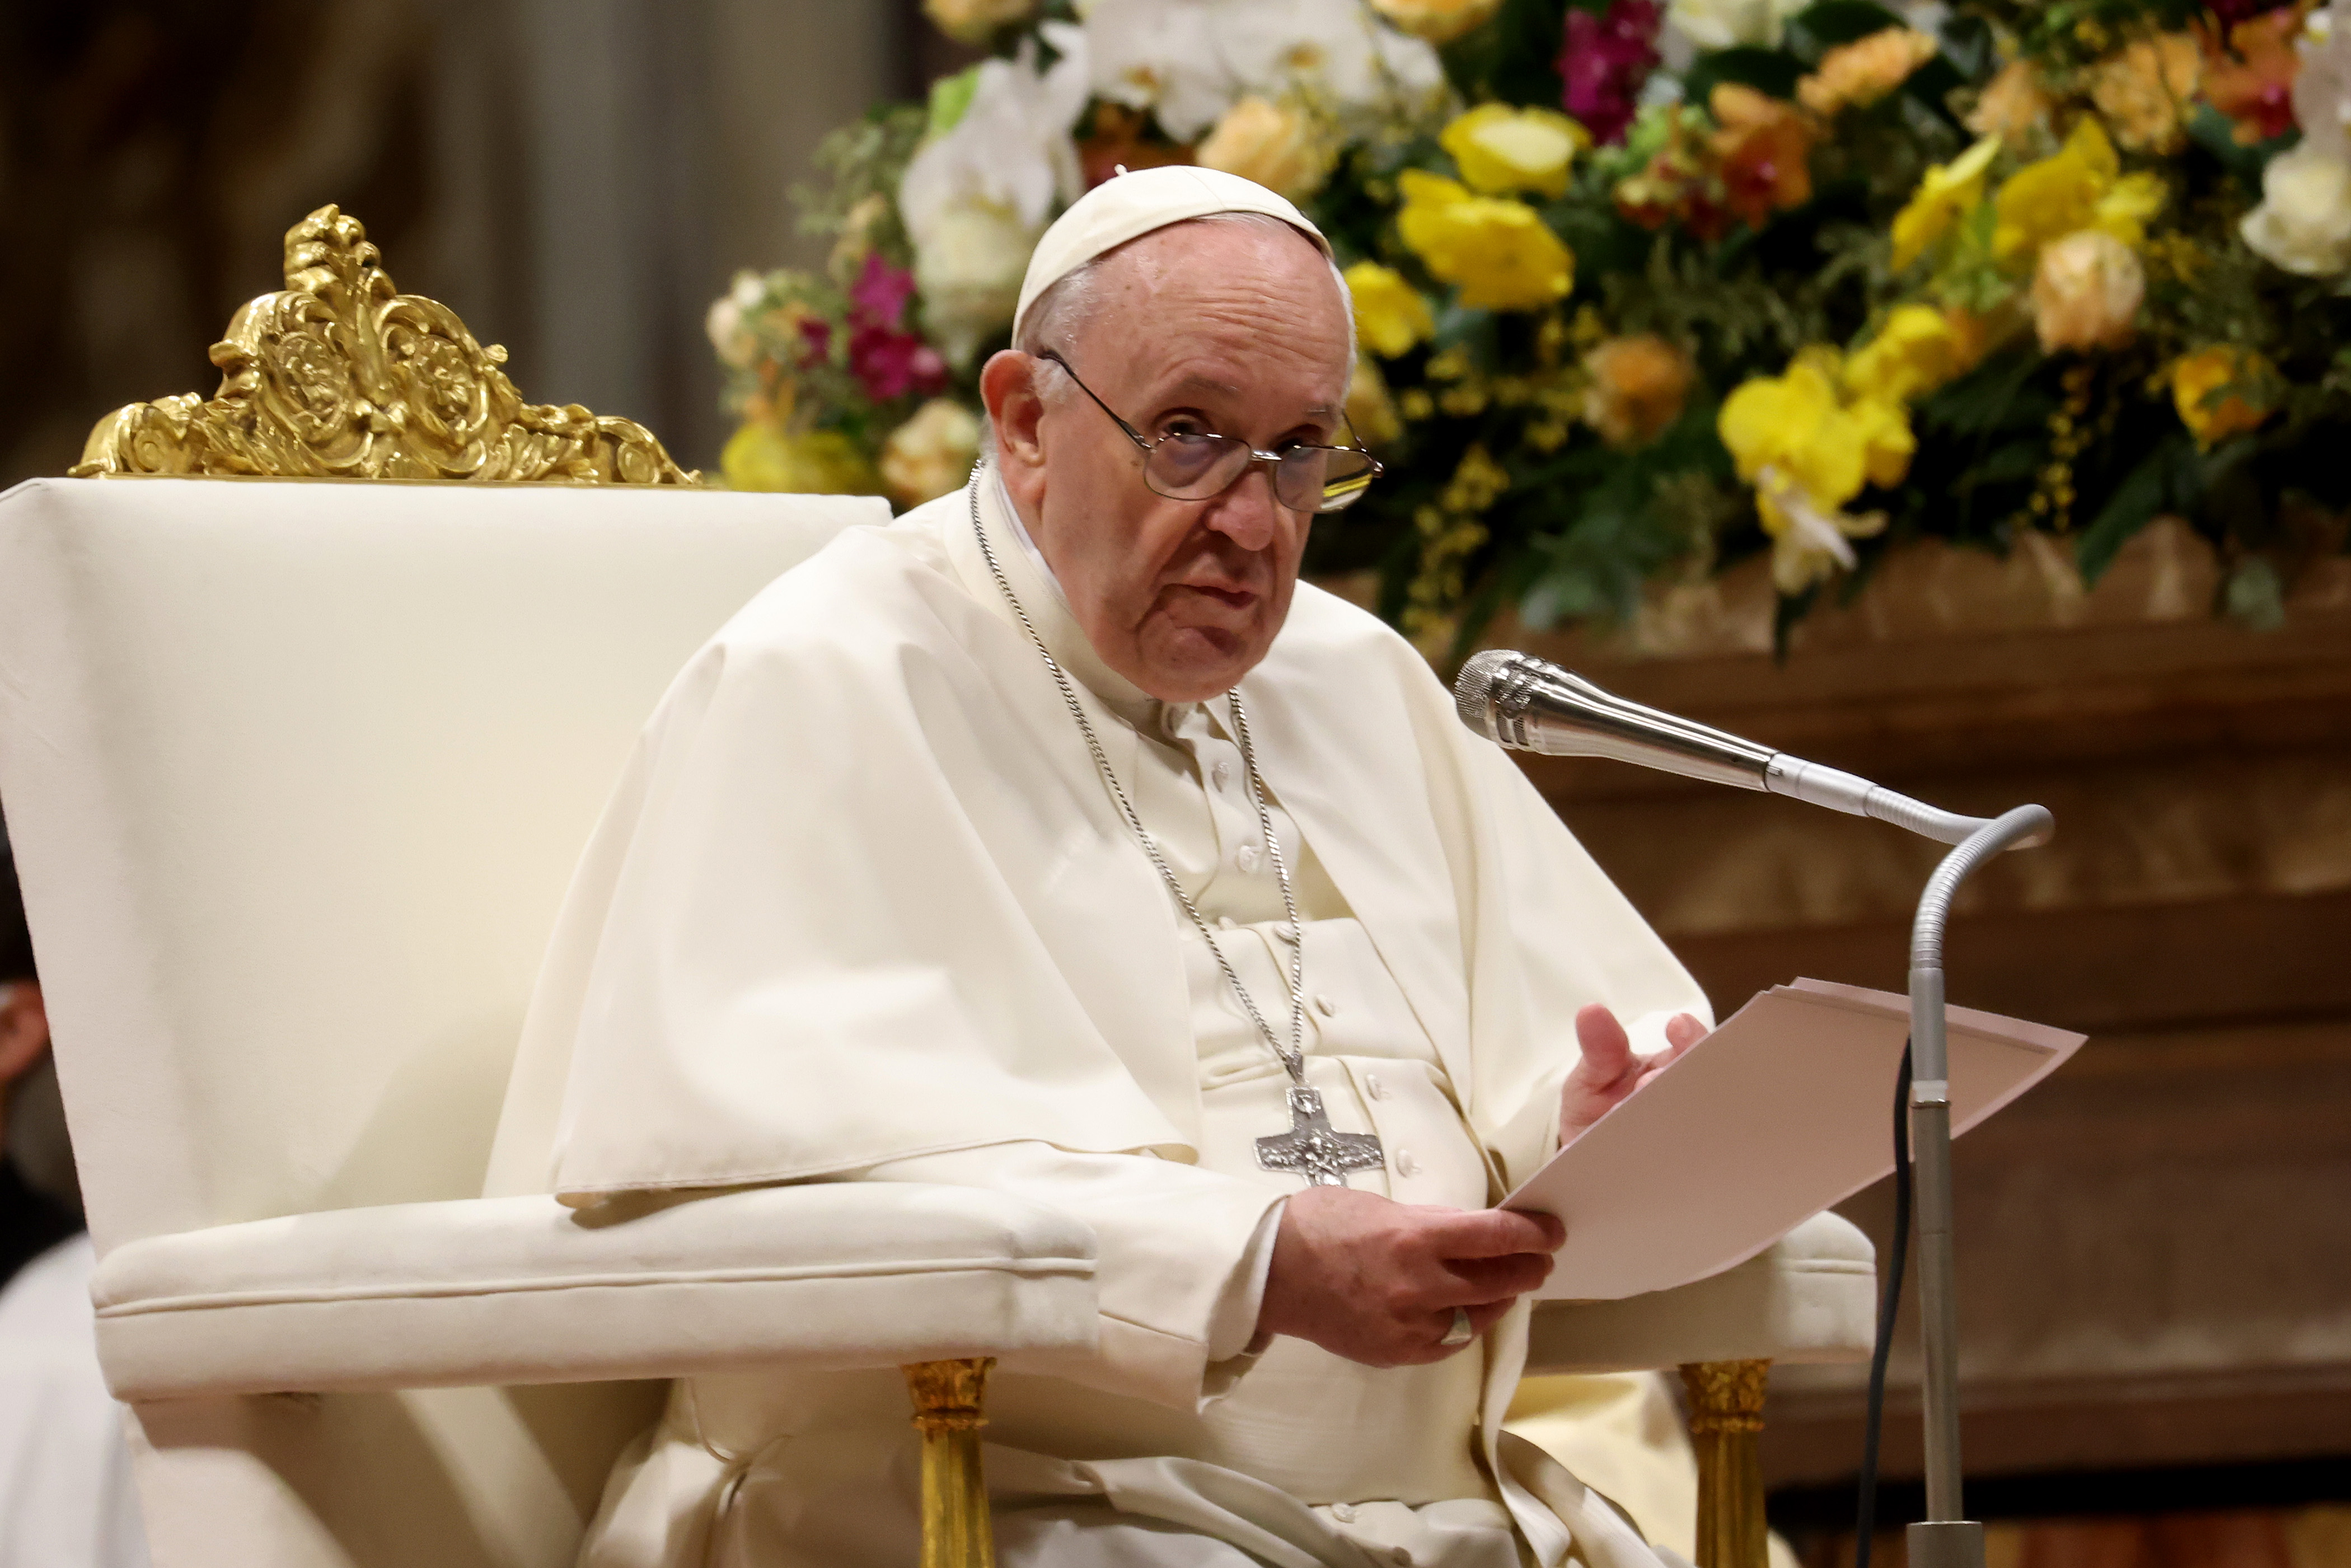 Pope Francis condemns ‘darkness of war’ in Ukraine at Easter vigil service